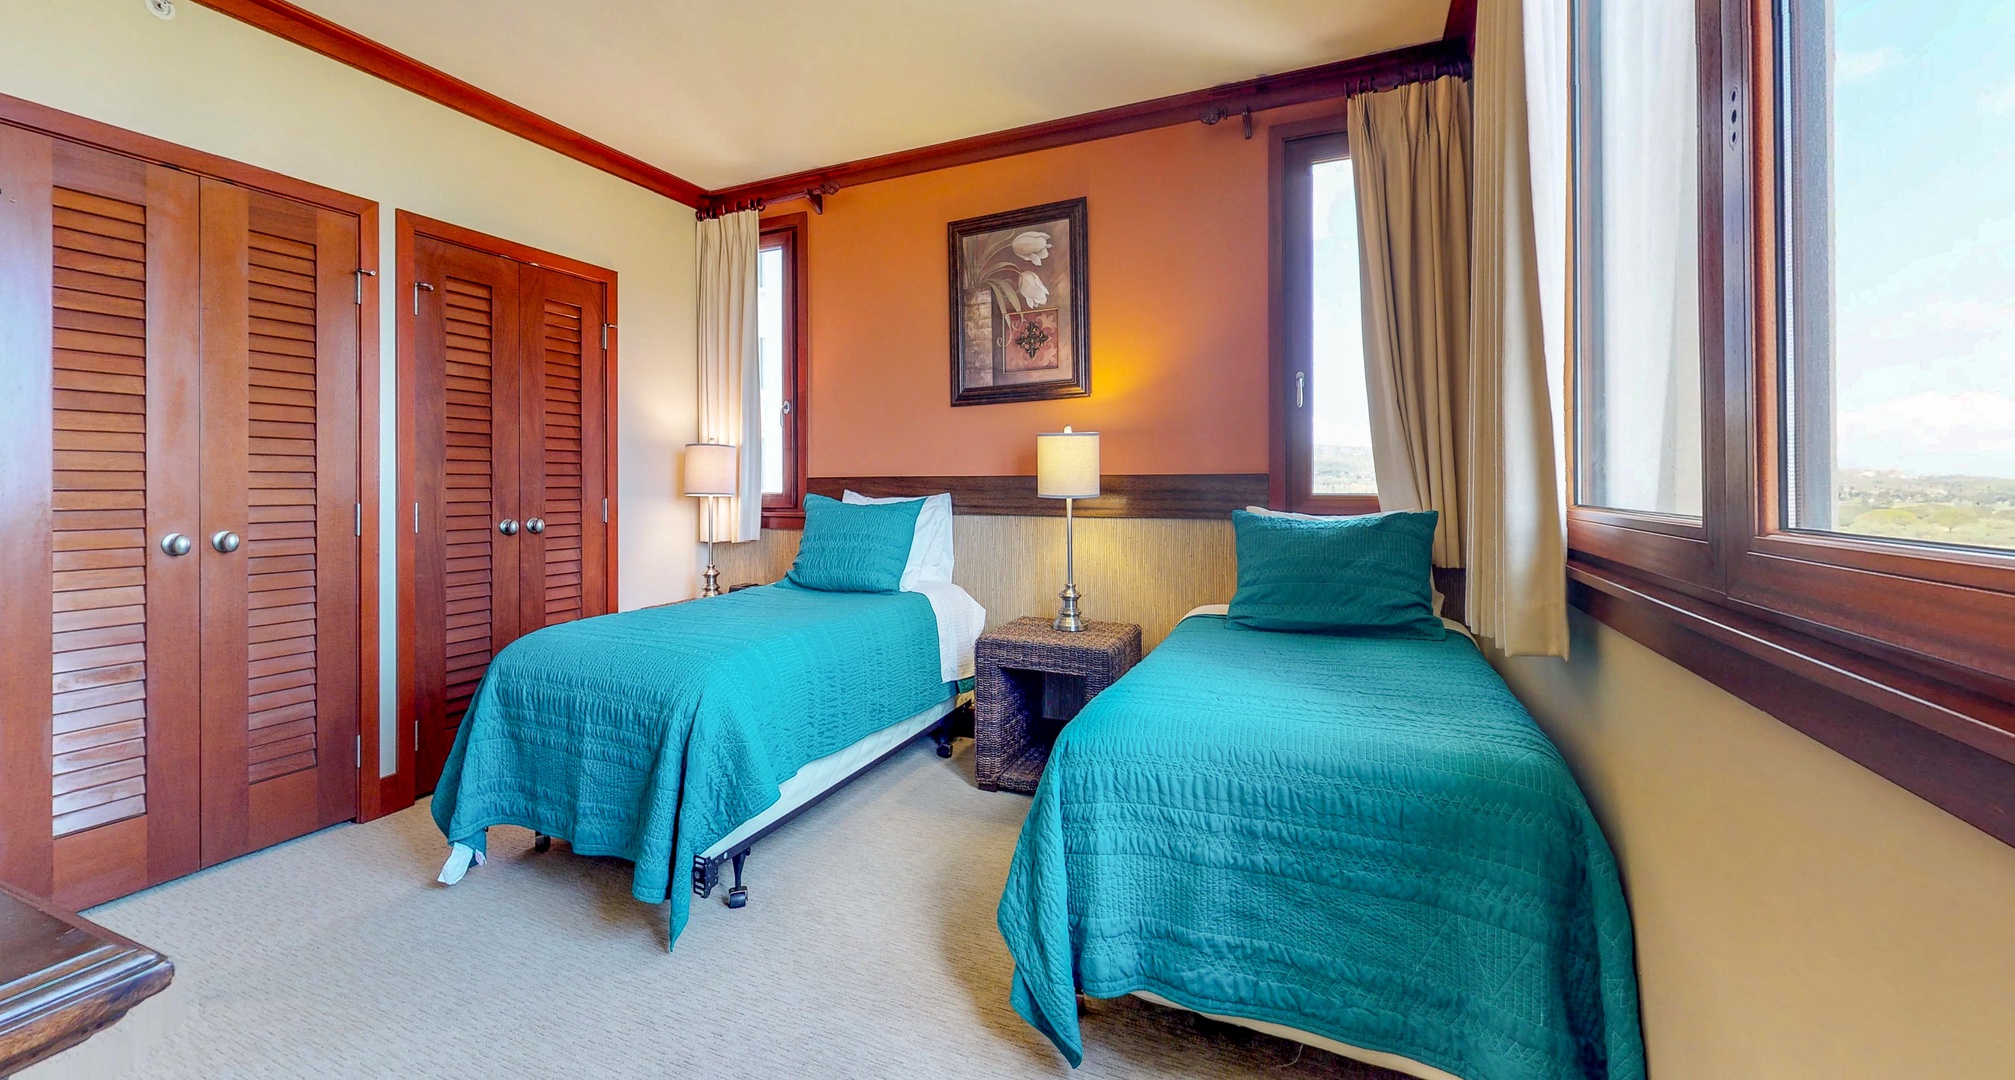 Kapolei Vacation Rentals, Ko Olina Beach Villas O822 - The third guest bedroom with bright views and colorful decor.